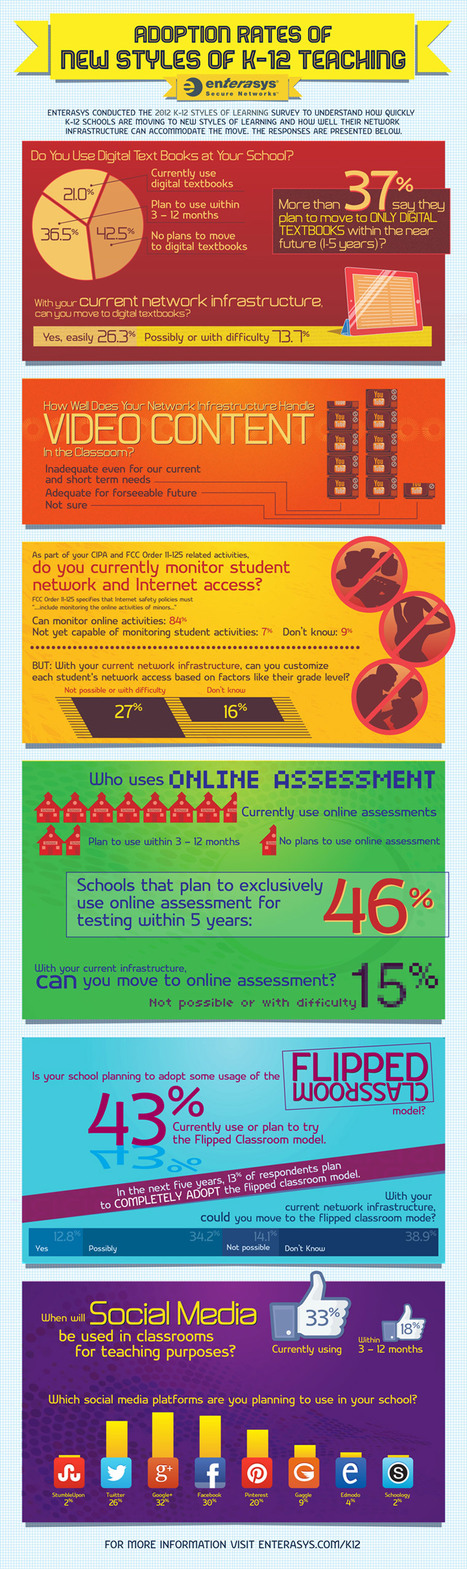 6 Hot Trends in Educational Technology [#Infographic] | :: The 4th Era :: | Scoop.it